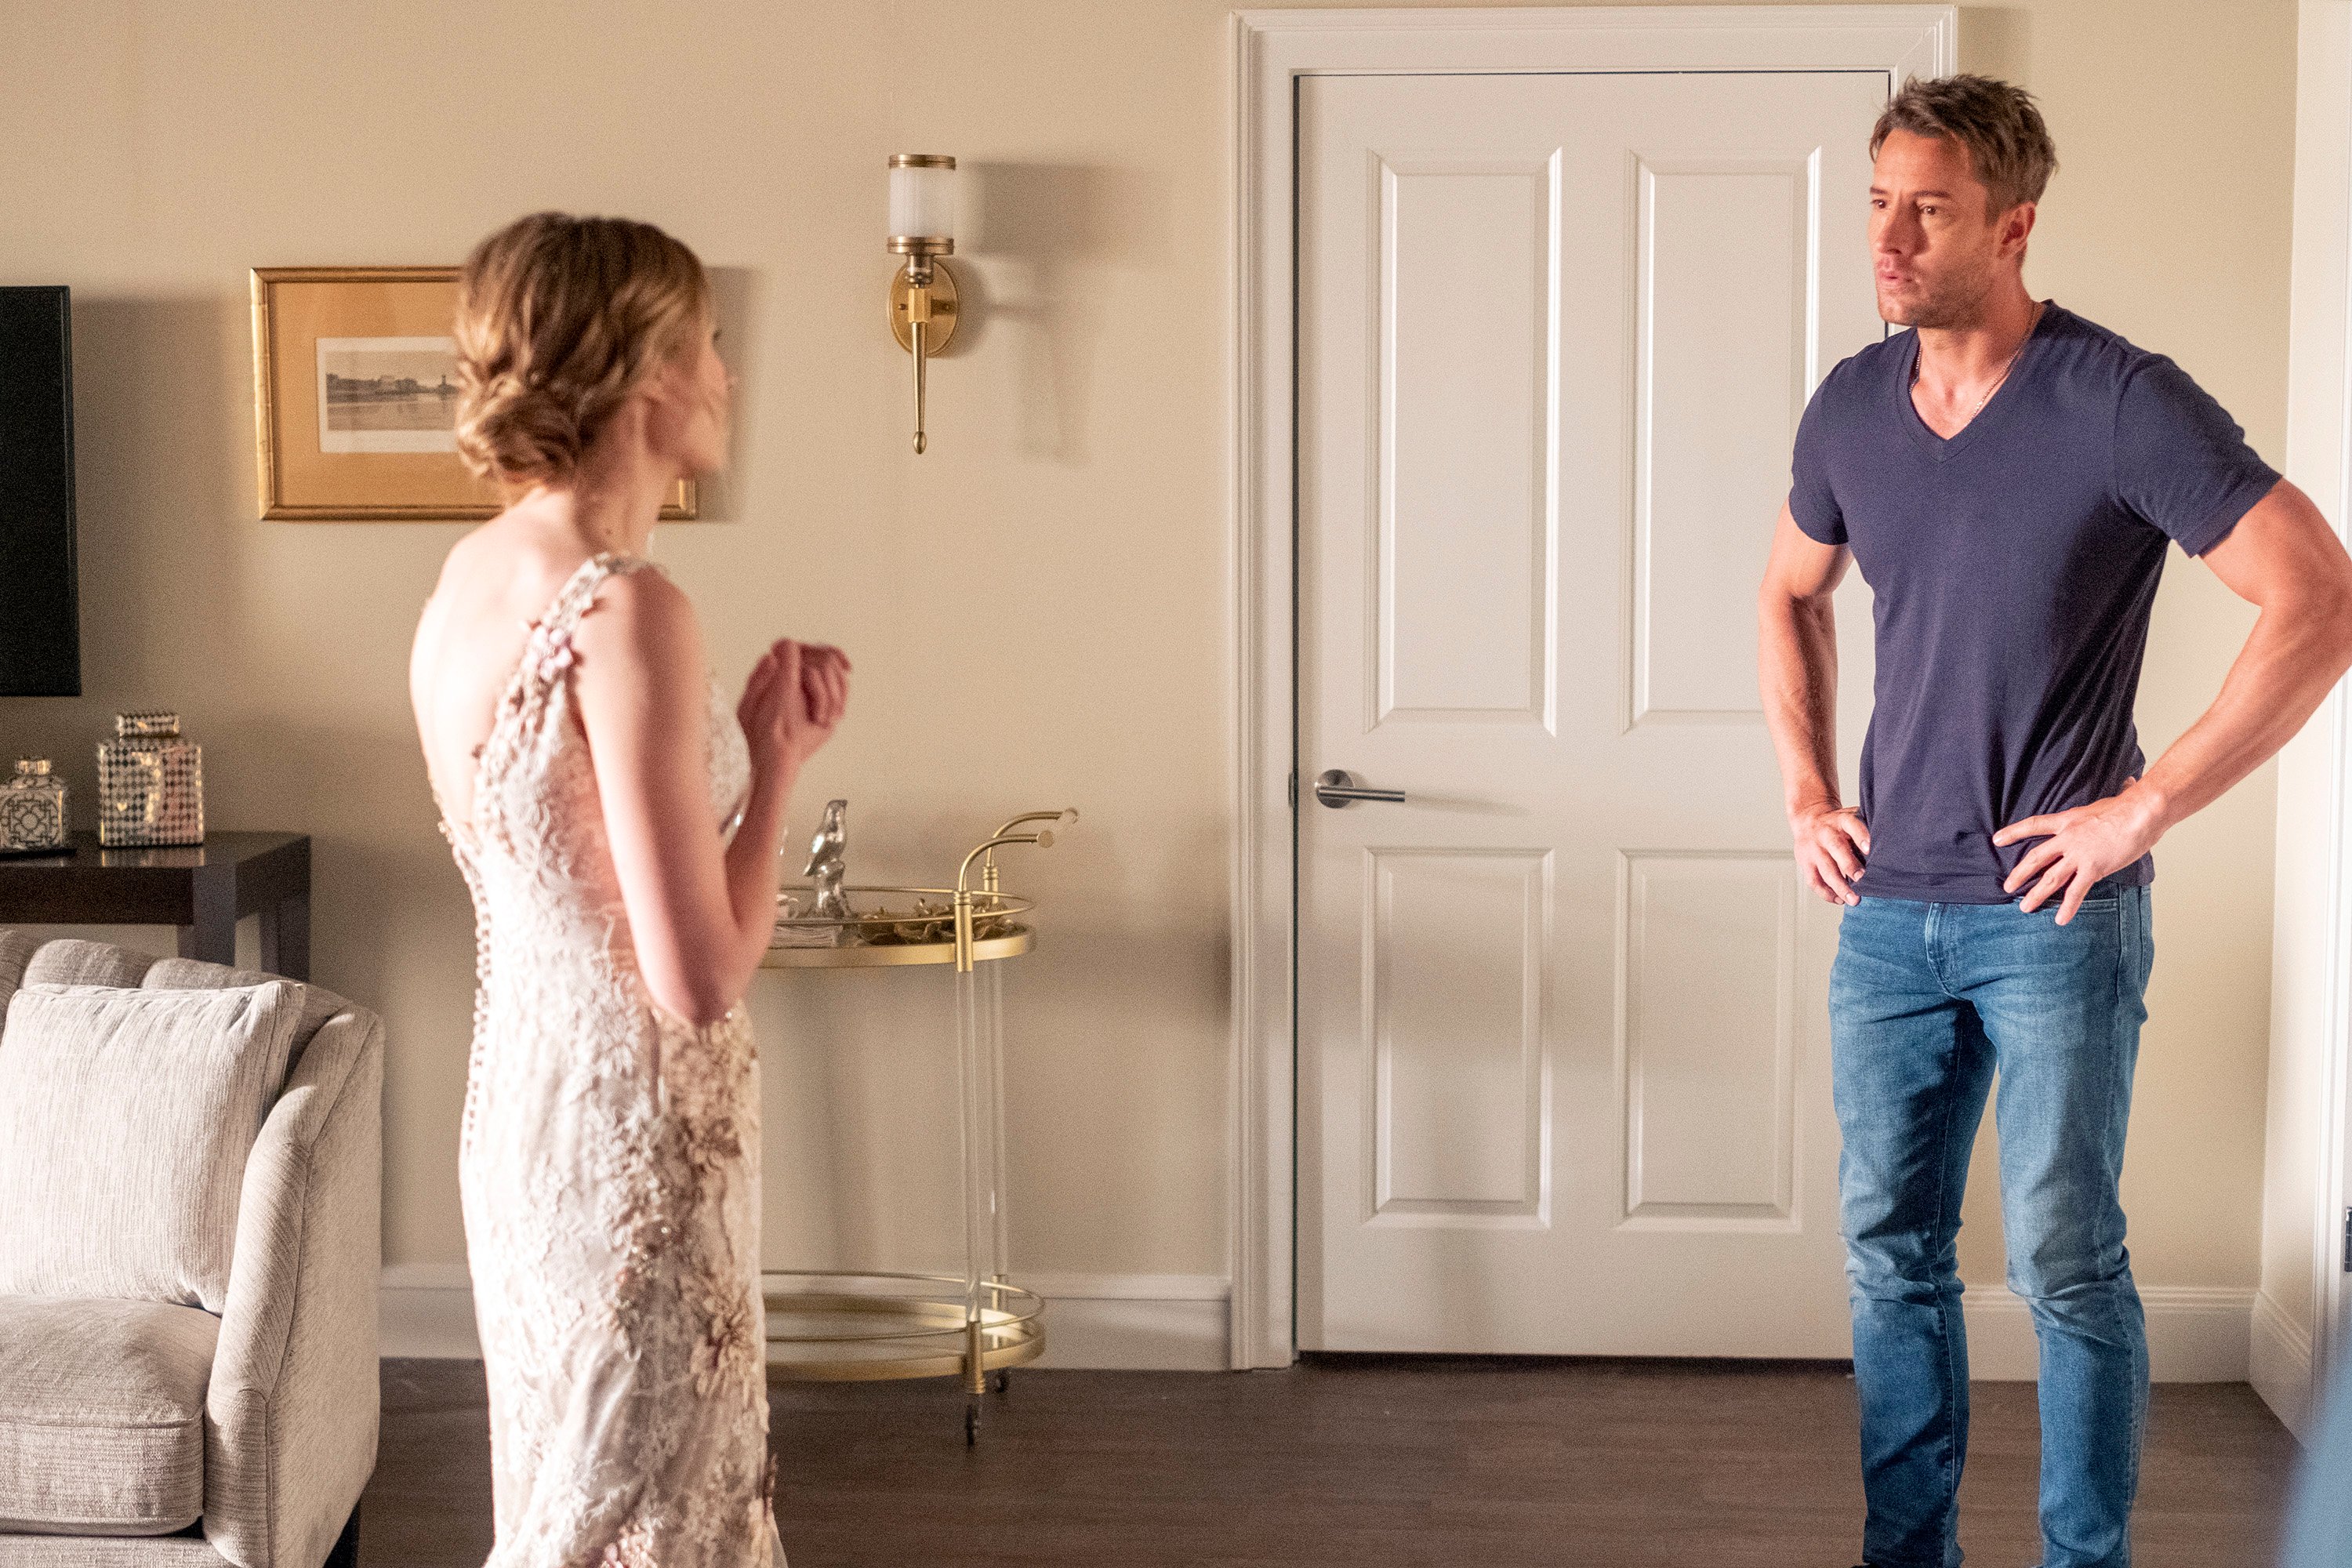 'This Is Us' Season 6 Episode 1 stars Caitlin Thompson and Justin Hartley, in character as Madison and Kevin, talk to one another. Madison wears a beaded white wedding dress. Kevin wears a dark blue t-shirt and jeans.